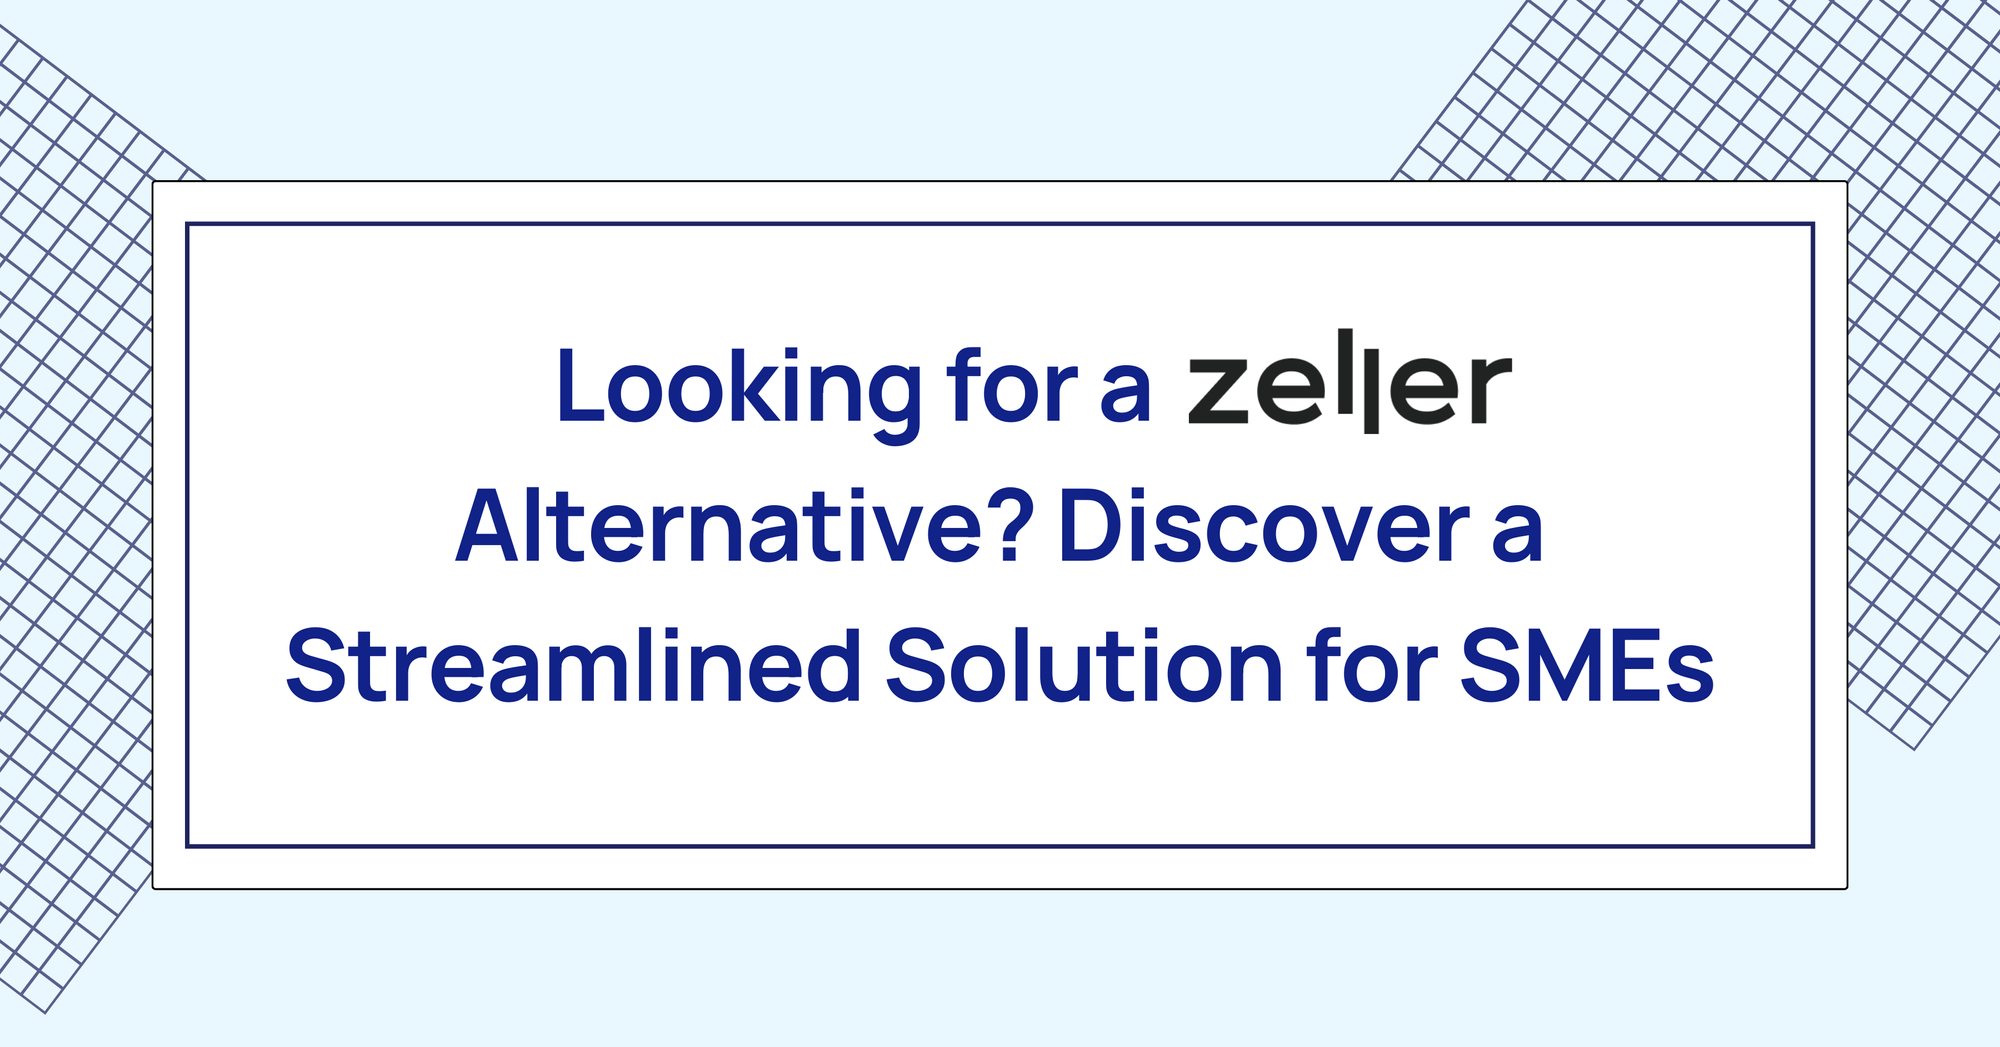 Looking for a Zeller Alternative? Discover a Streamlined Solution for SMEs